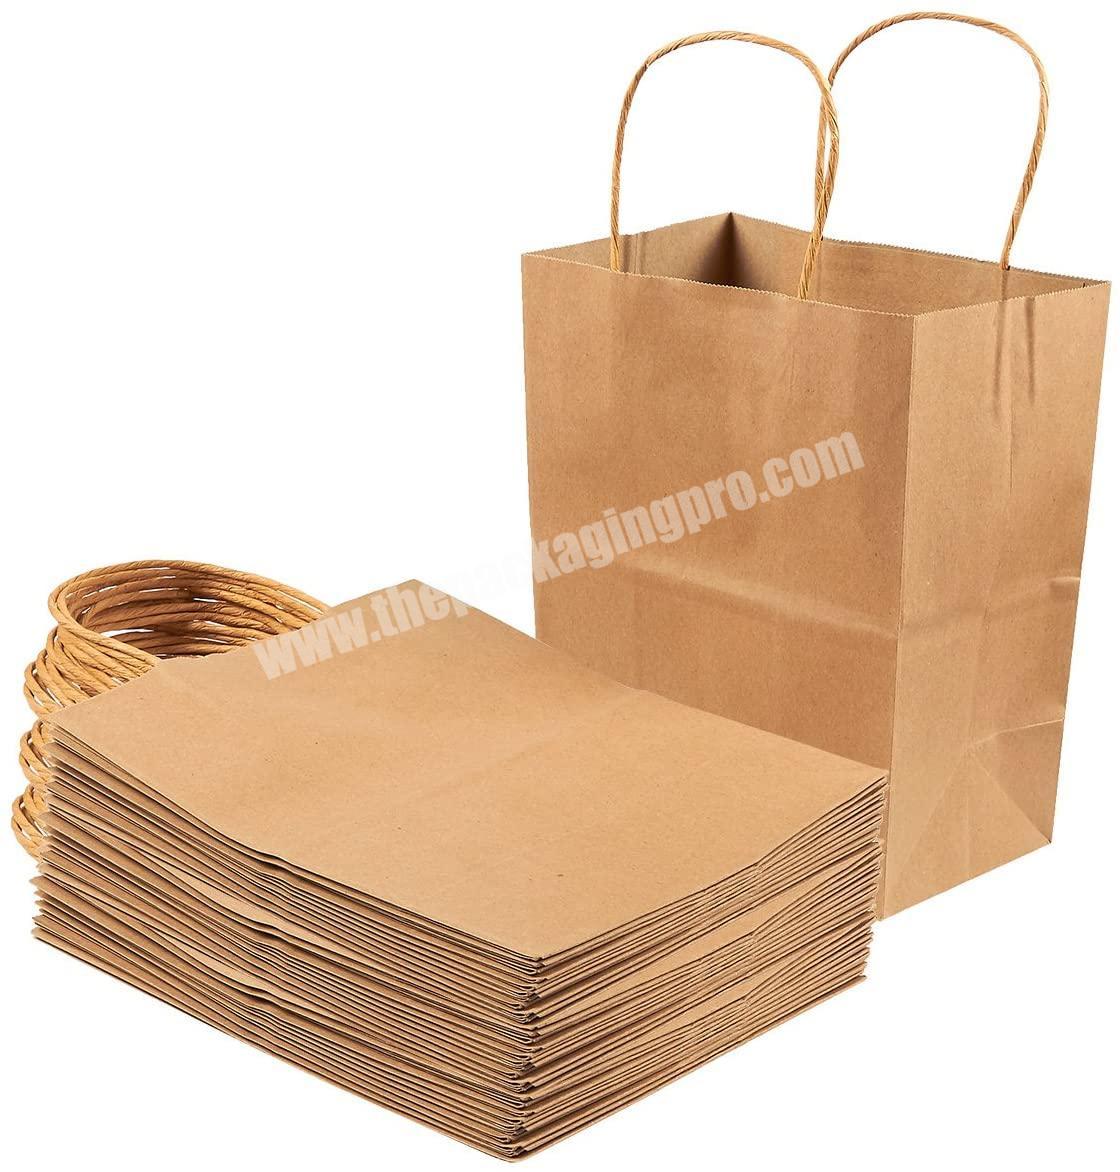 Recyclable Kraft Paper Bag With Your Own Logo, Custom Shopping Paper Bag For Food With Handle